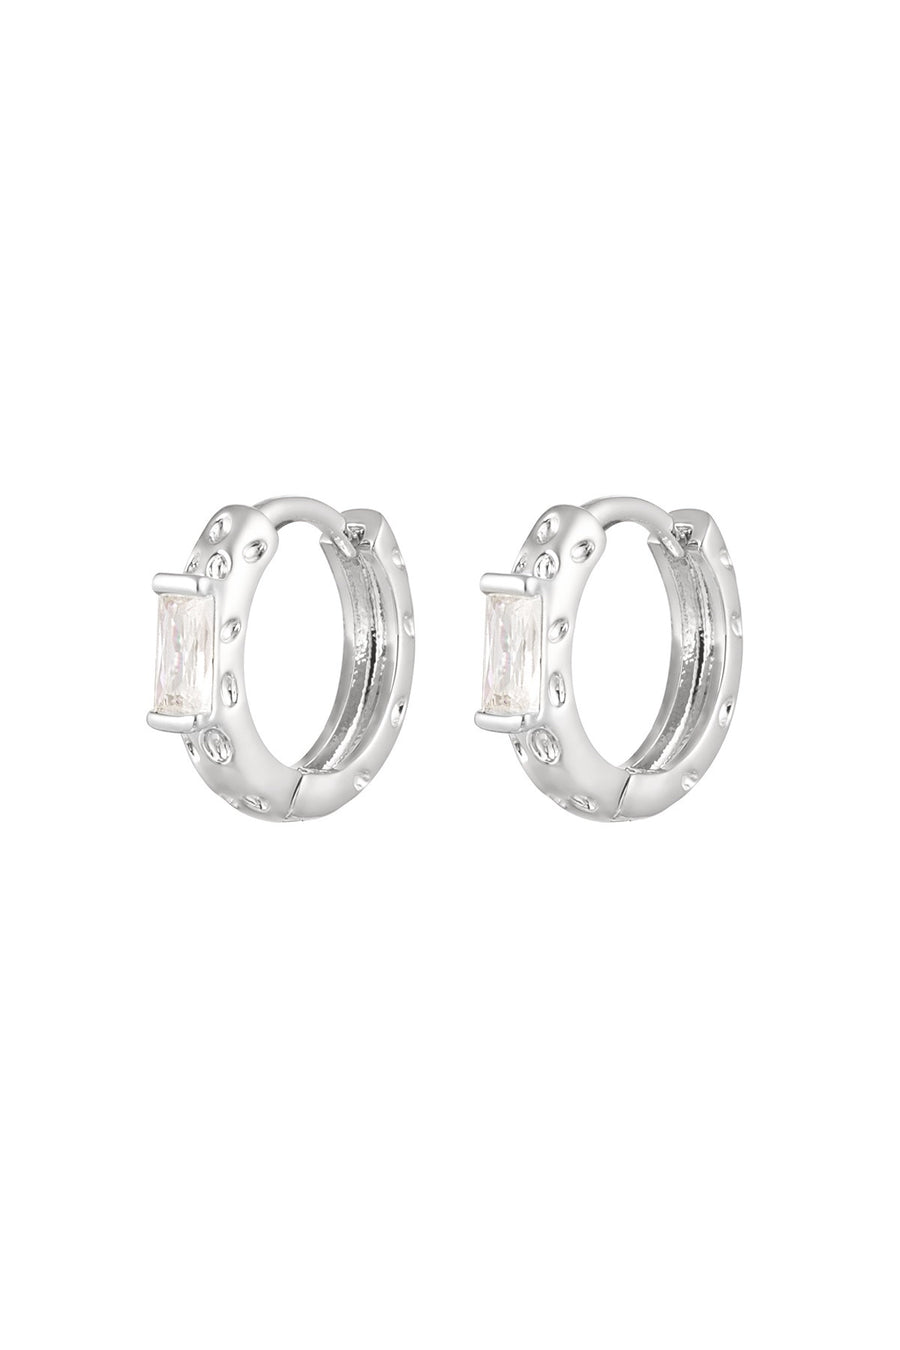 Taylor Hoops Earrings - Gold & Silver available